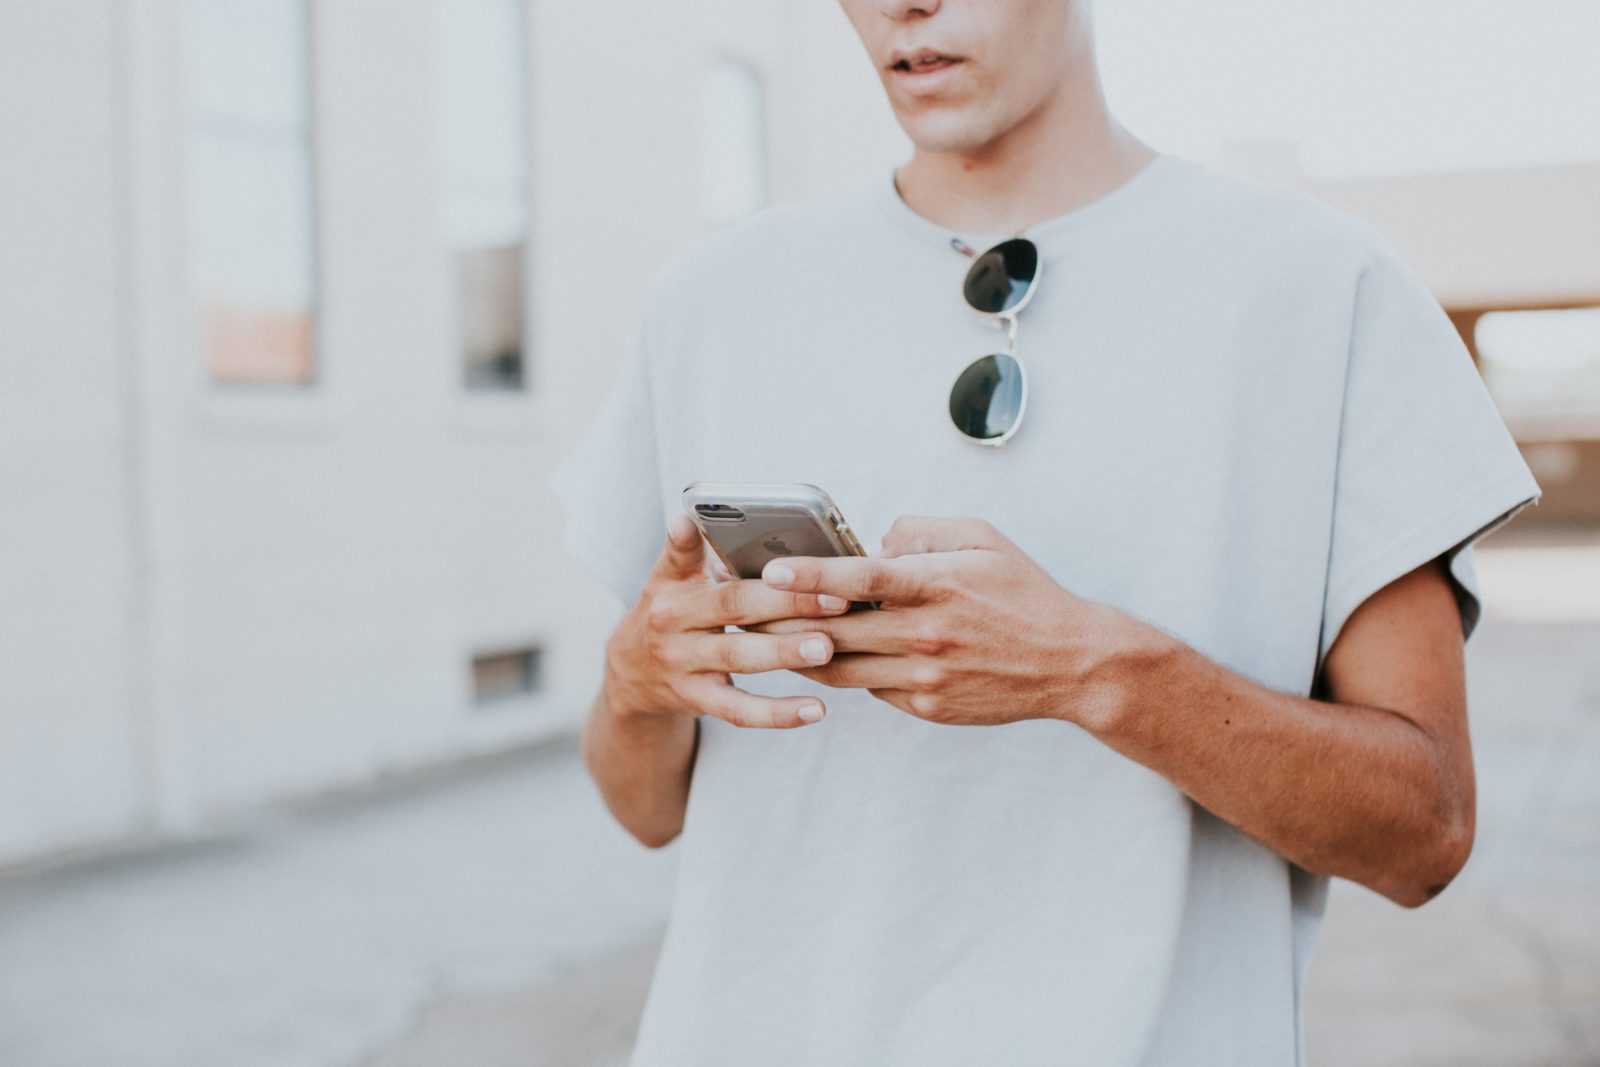 Five Ways Gen Z Differs from Millennials When it Comes to Marketing